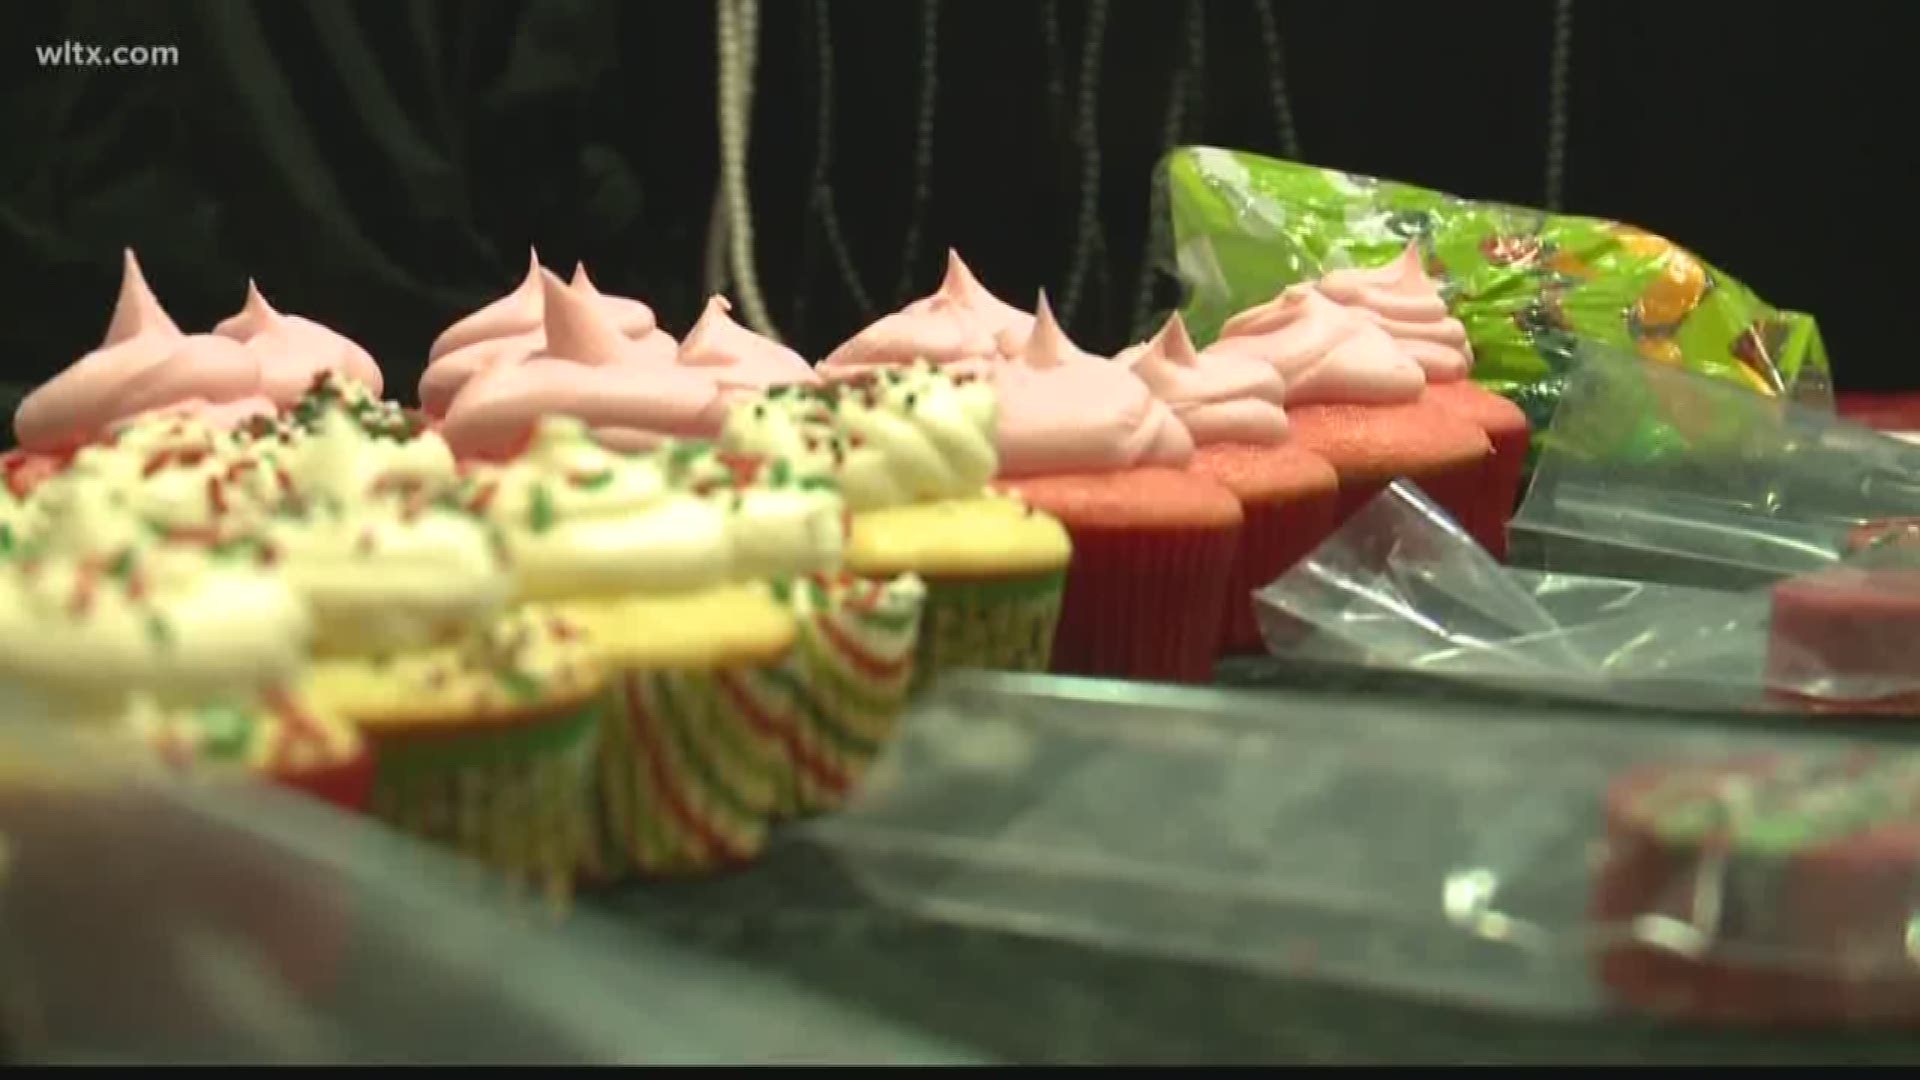 Christmas Peddler Craft Show brings in the shoppers